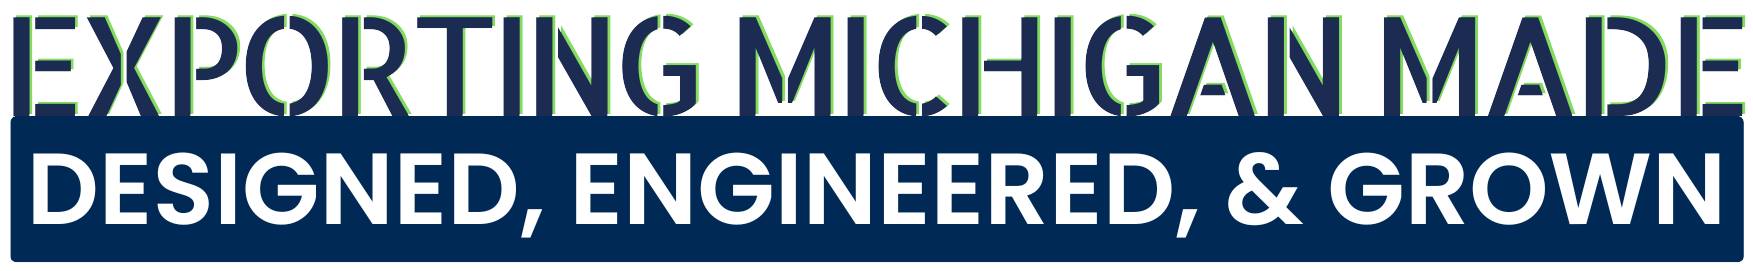 Exporting Michigan Made, Designed, Engineered, and Grown